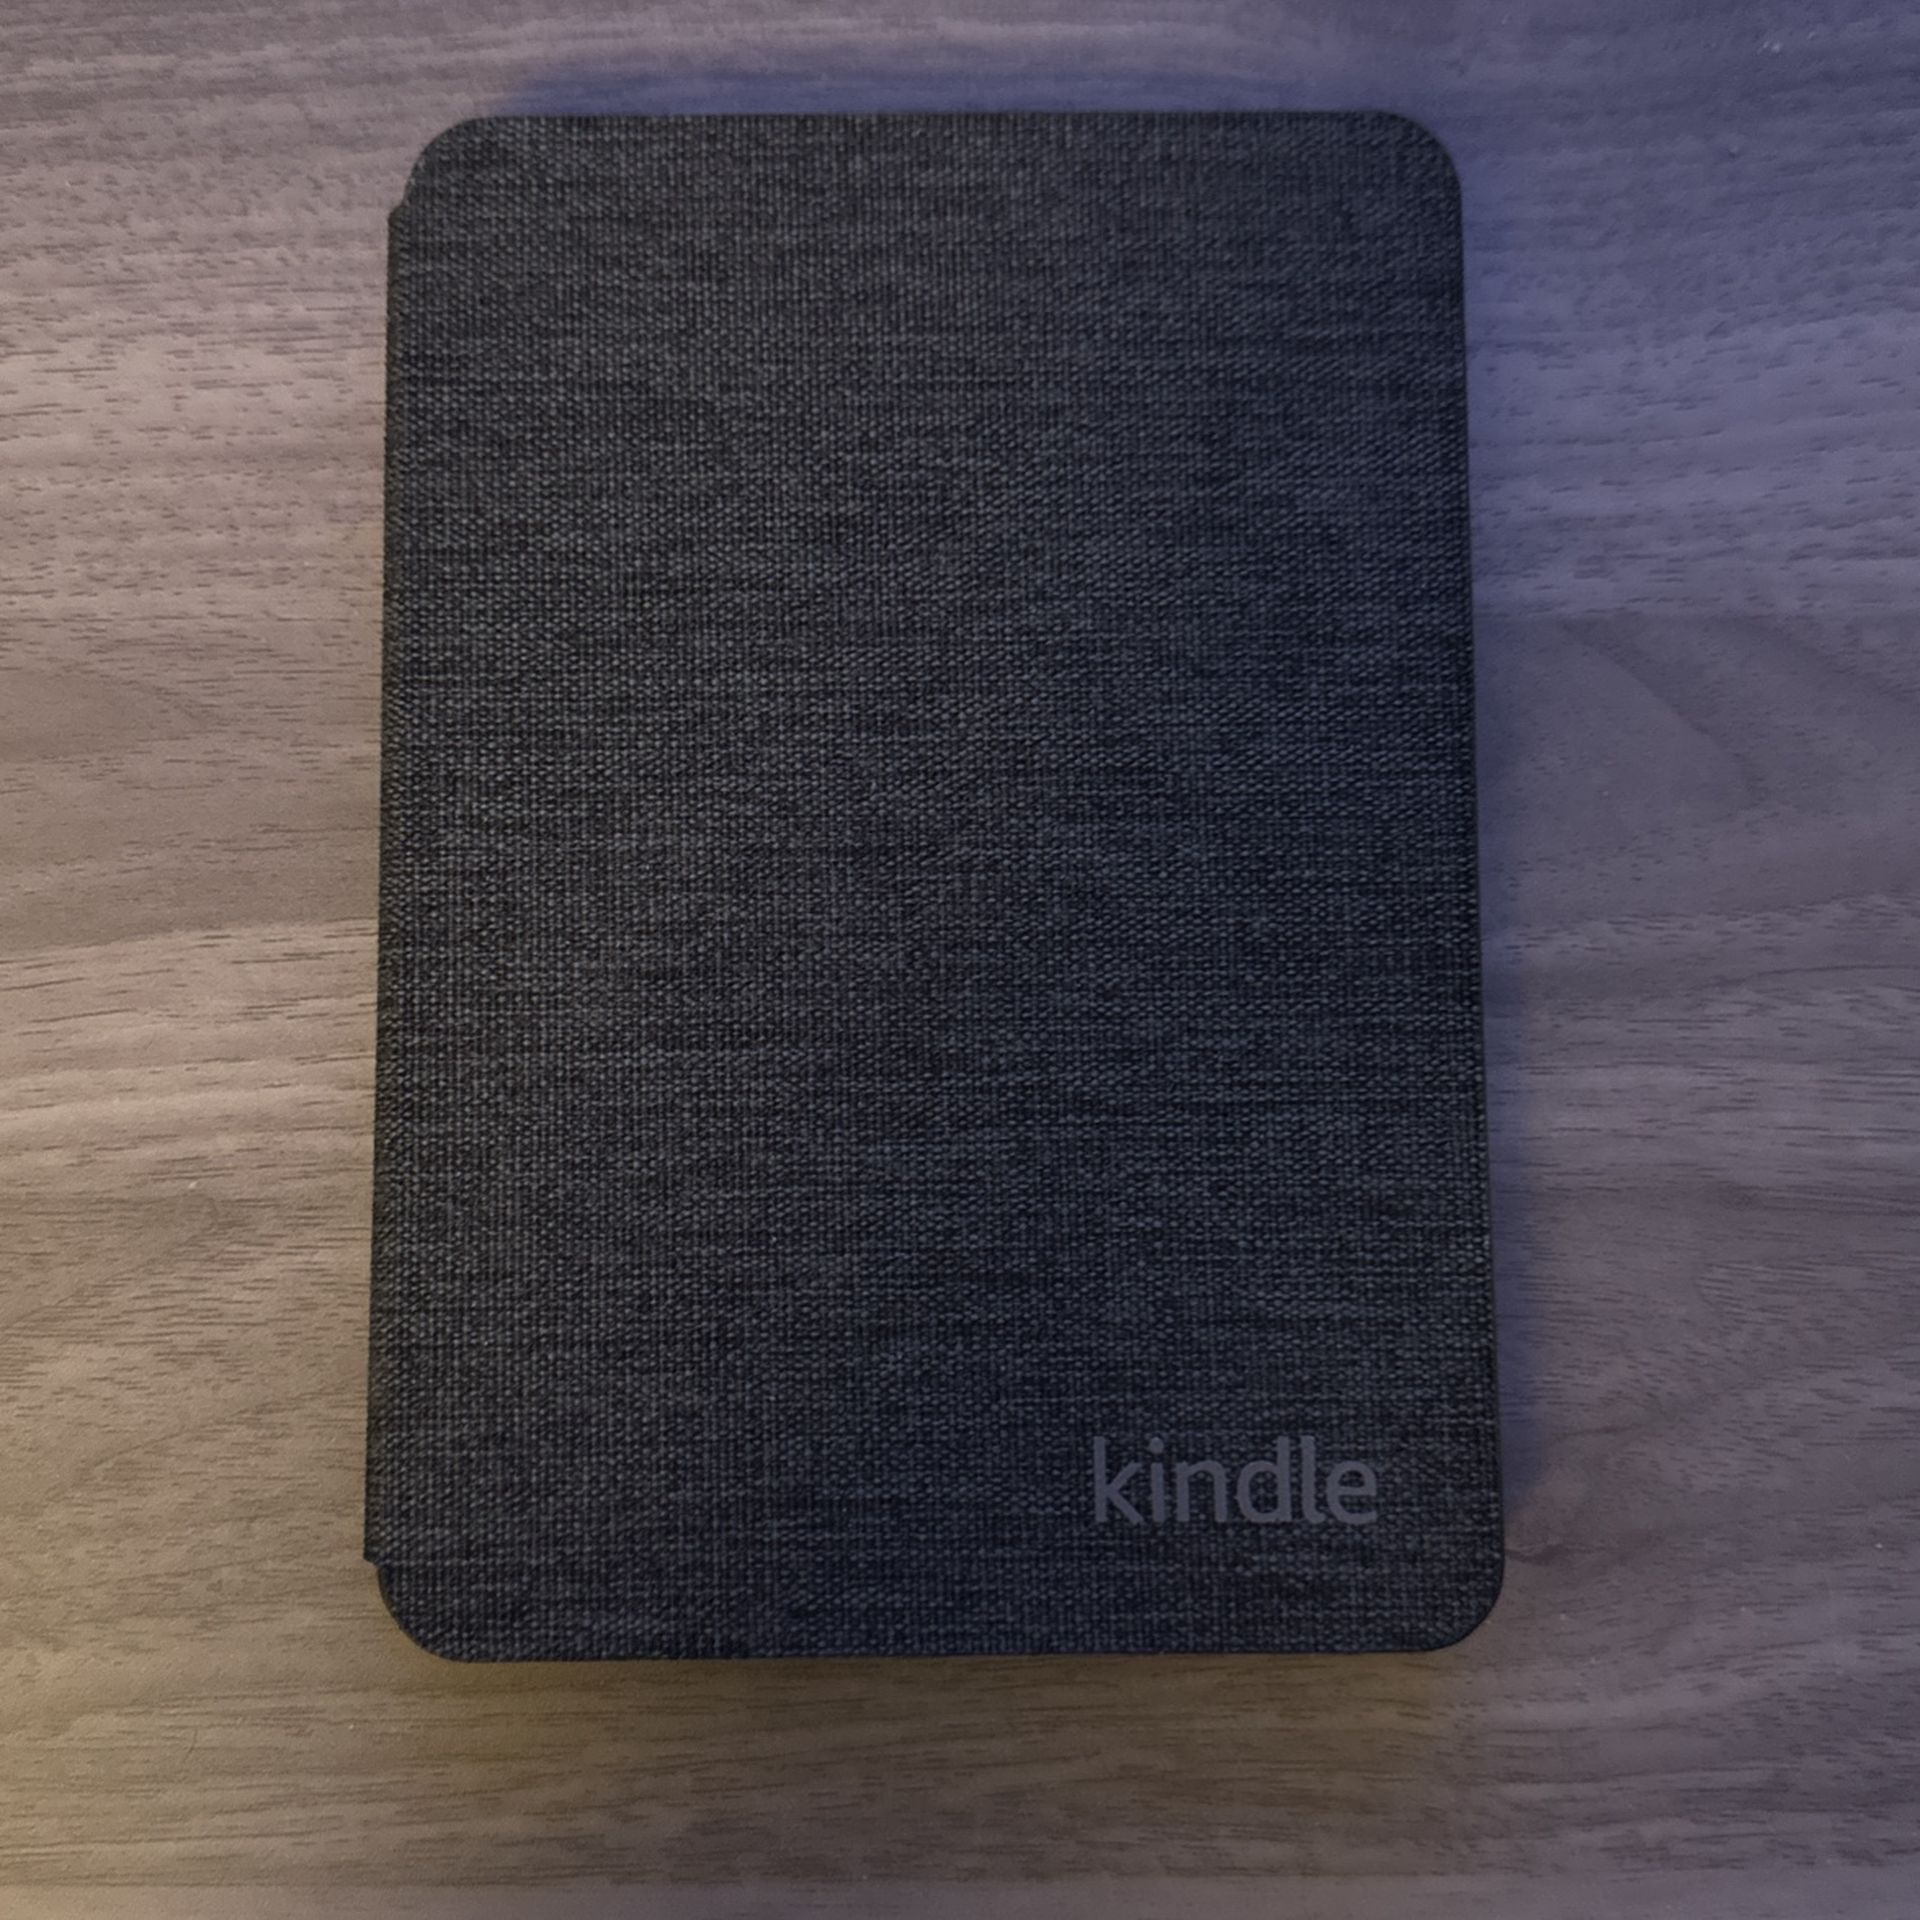 Kindle 11th Gen with case